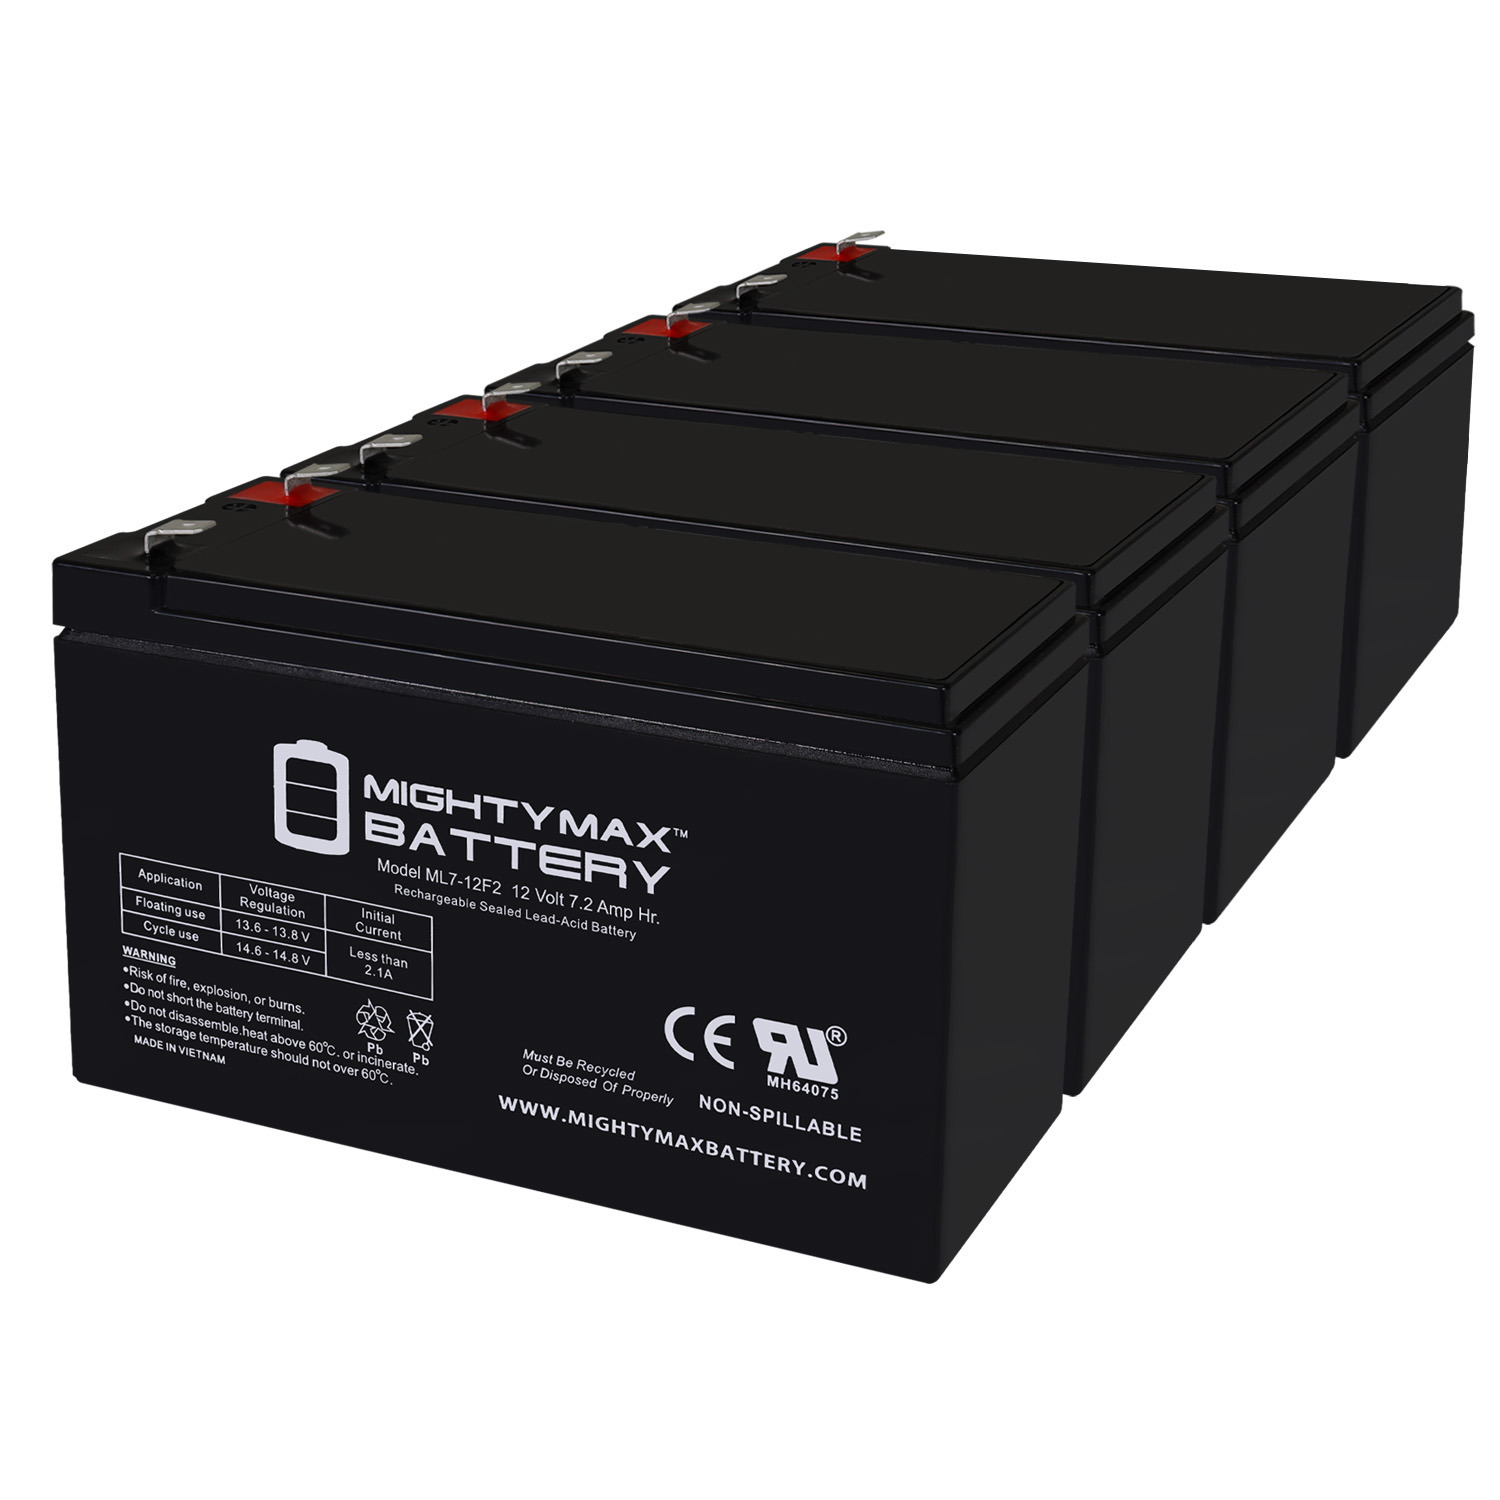 12V 7Ah F2 Replacement Battery for Minuteman MM500 CP2 - 4 Pack